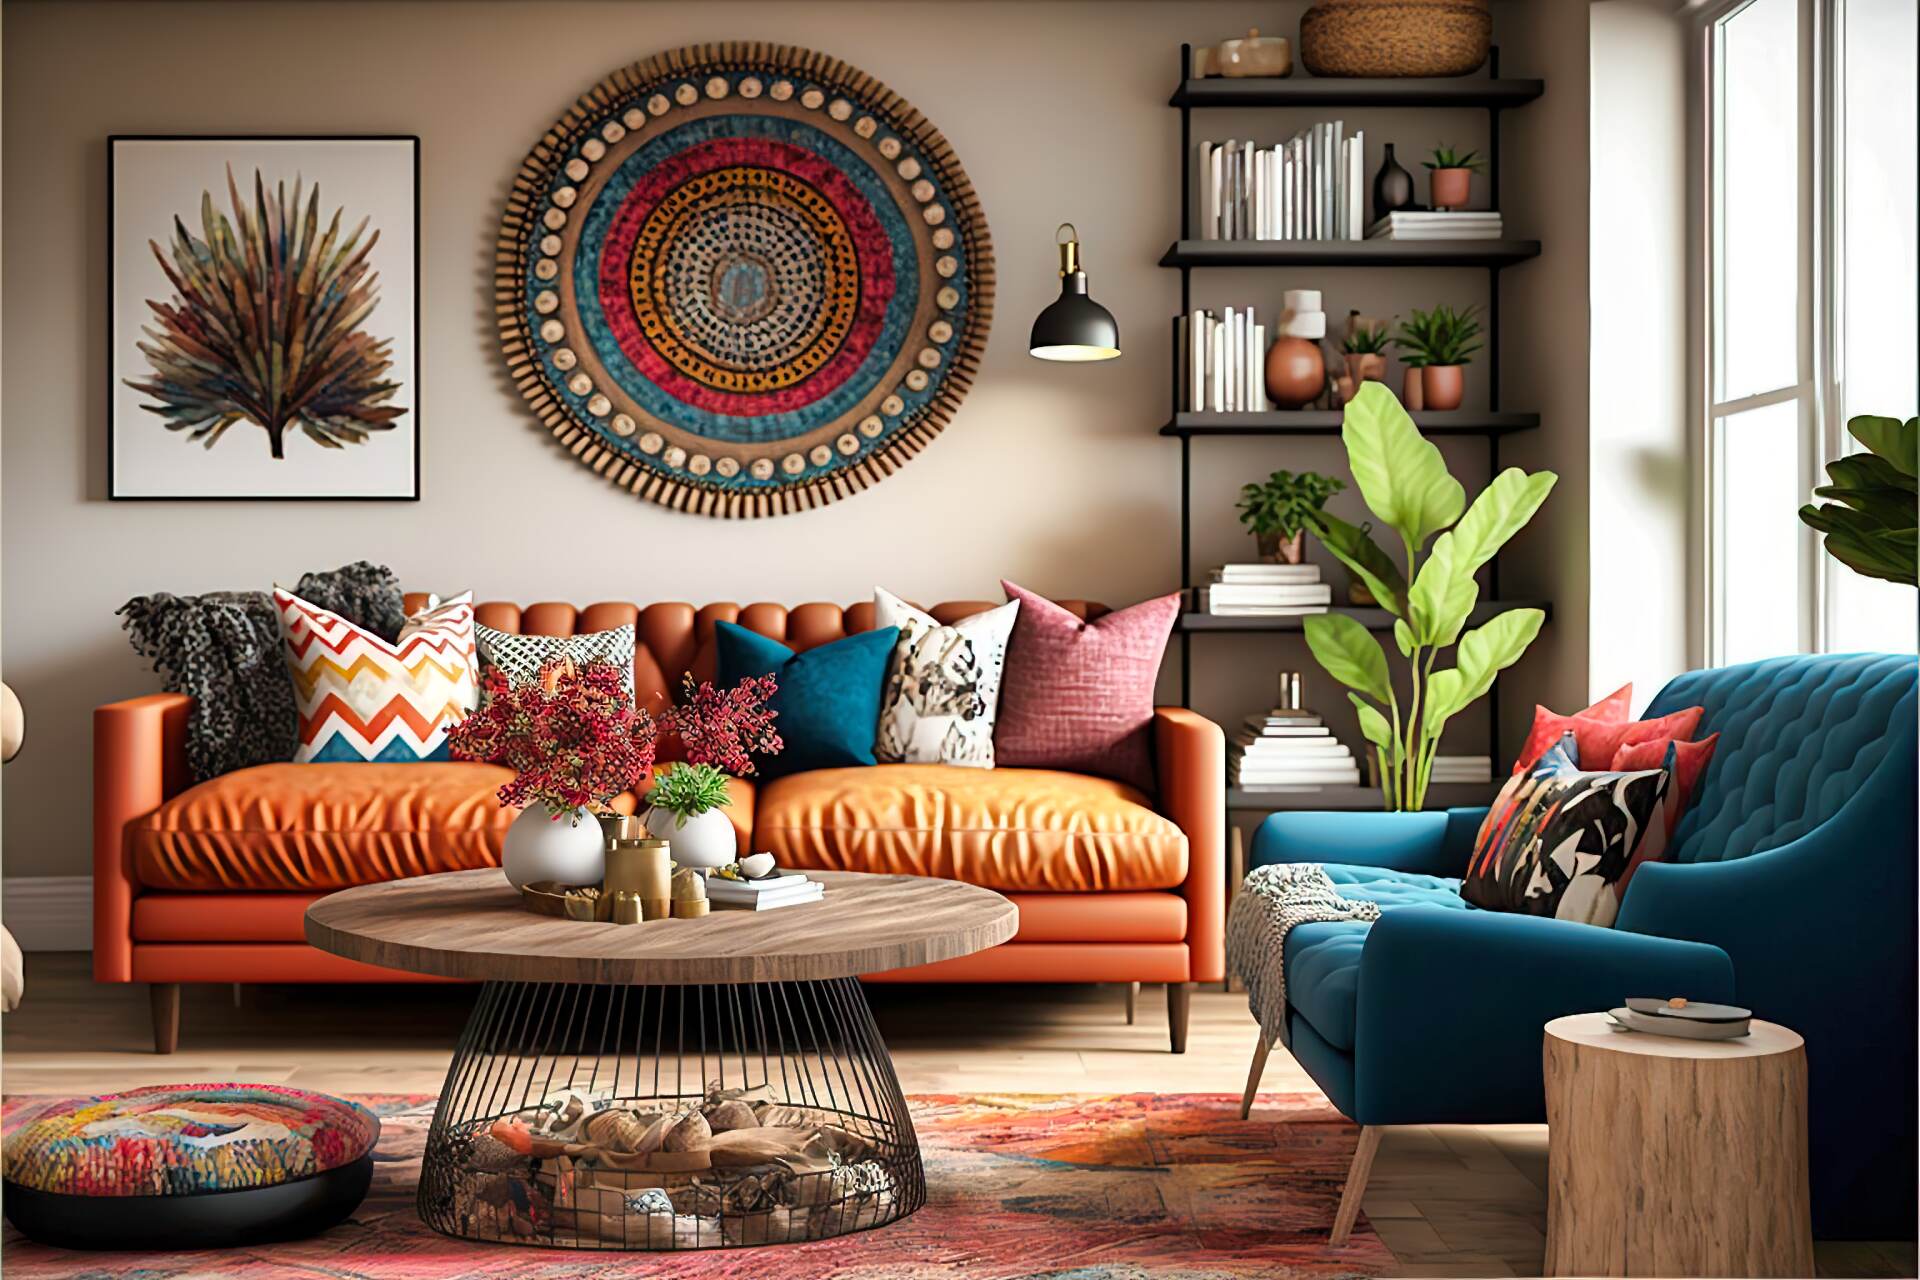 This Modern Boho-Chic Style Living Room Features Plenty Of Color And Texture. A Colorful Velvet Armchair And A Matching Sofa Provide A Cozy Seating Area, While A Large Round Rug And A Wicker Coffee Table Add A Boho Touch To The Space. A Large Wall Hanging And A Few Bookshelves Complete The Look.